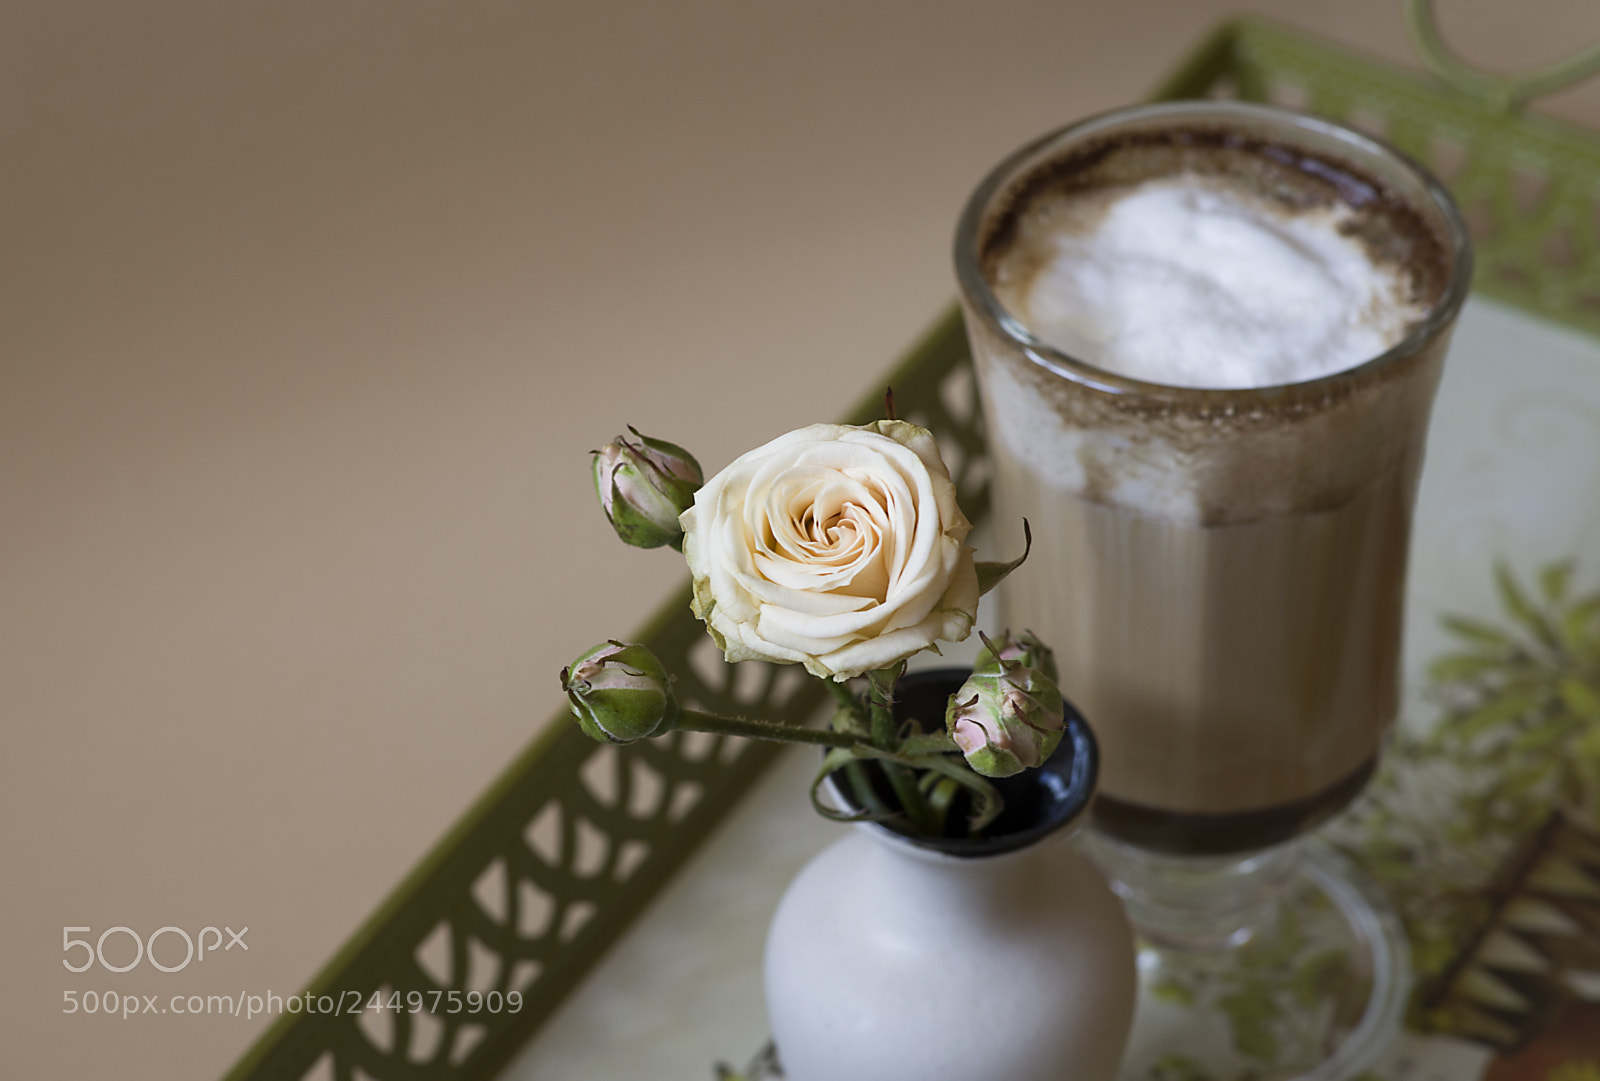 Pentax K-30 sample photo. Cappuccino with a rose photography